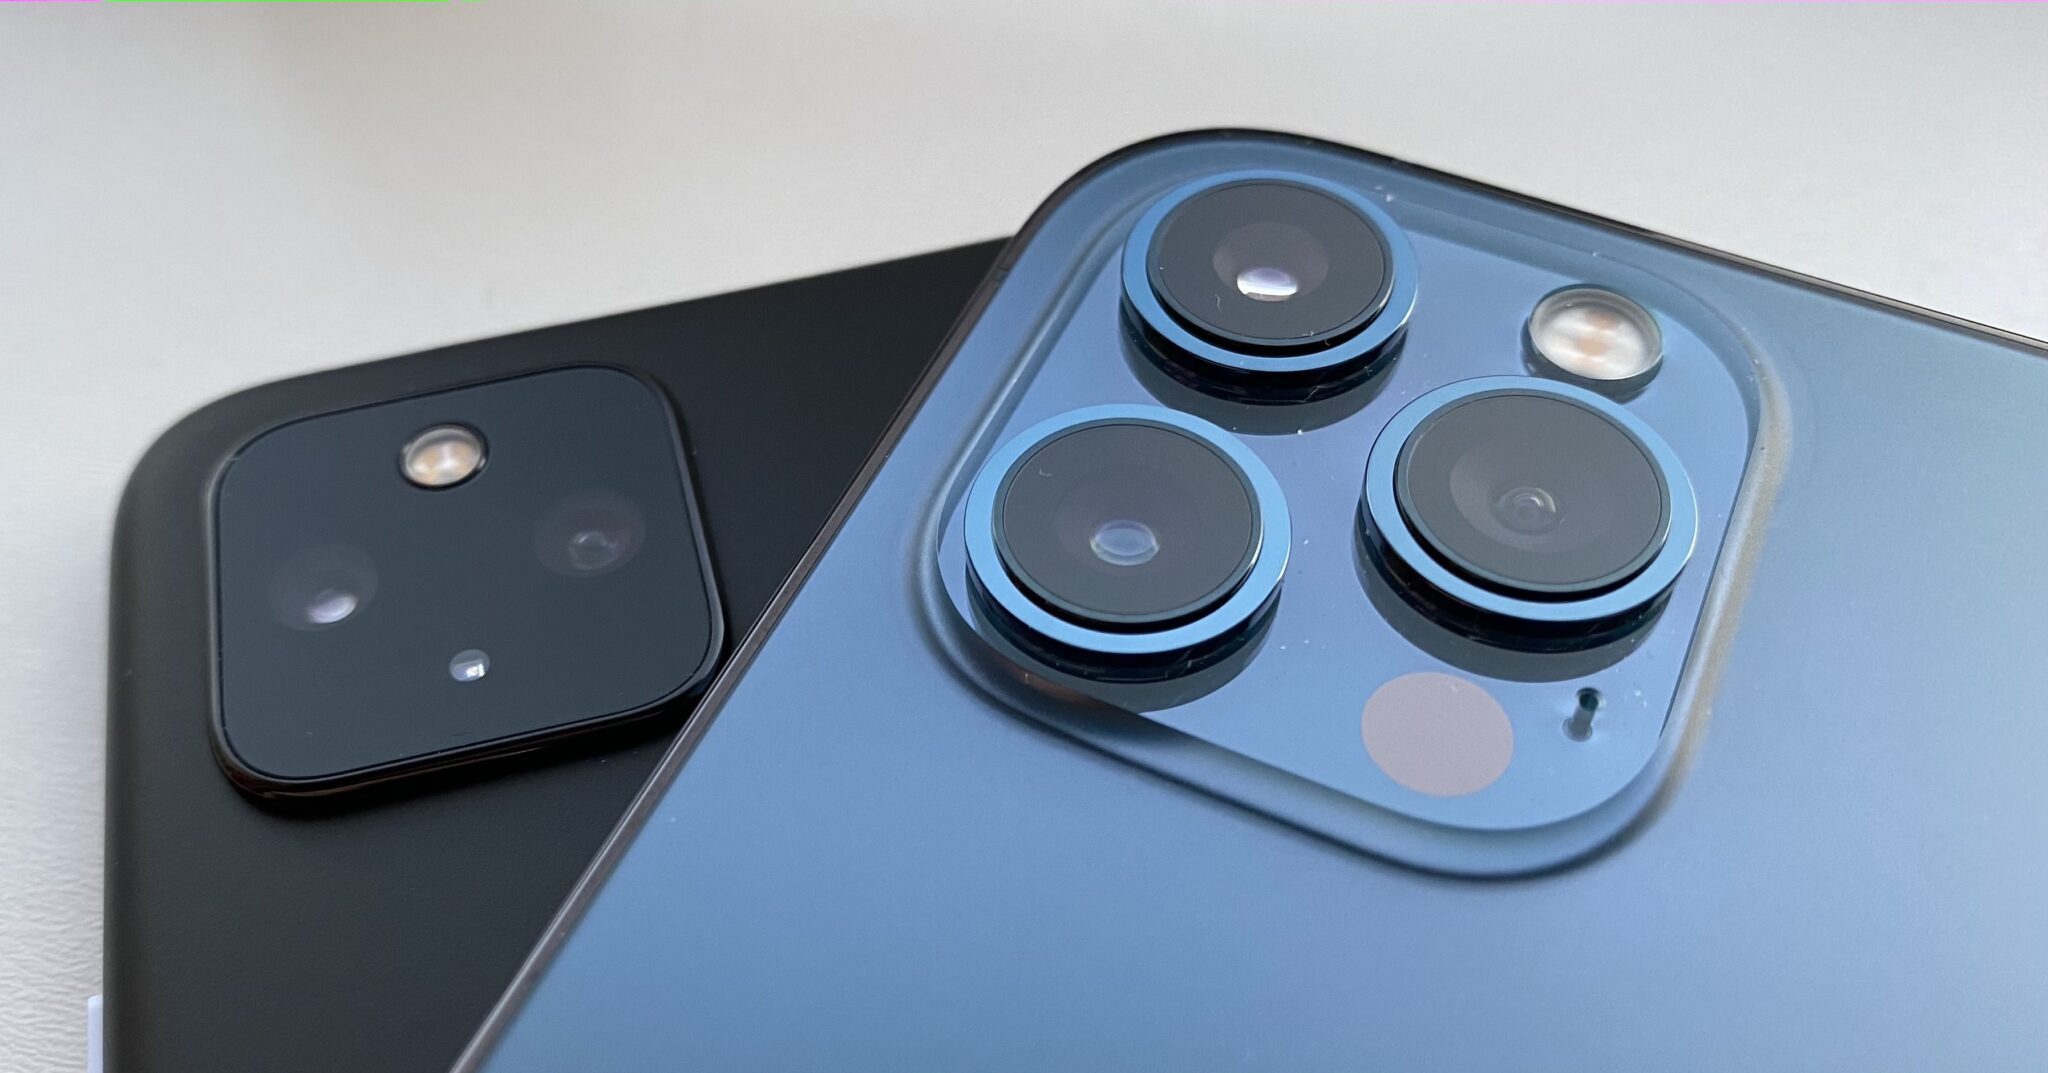 Pixel 5 and iPhone 12 Pro Max cameras